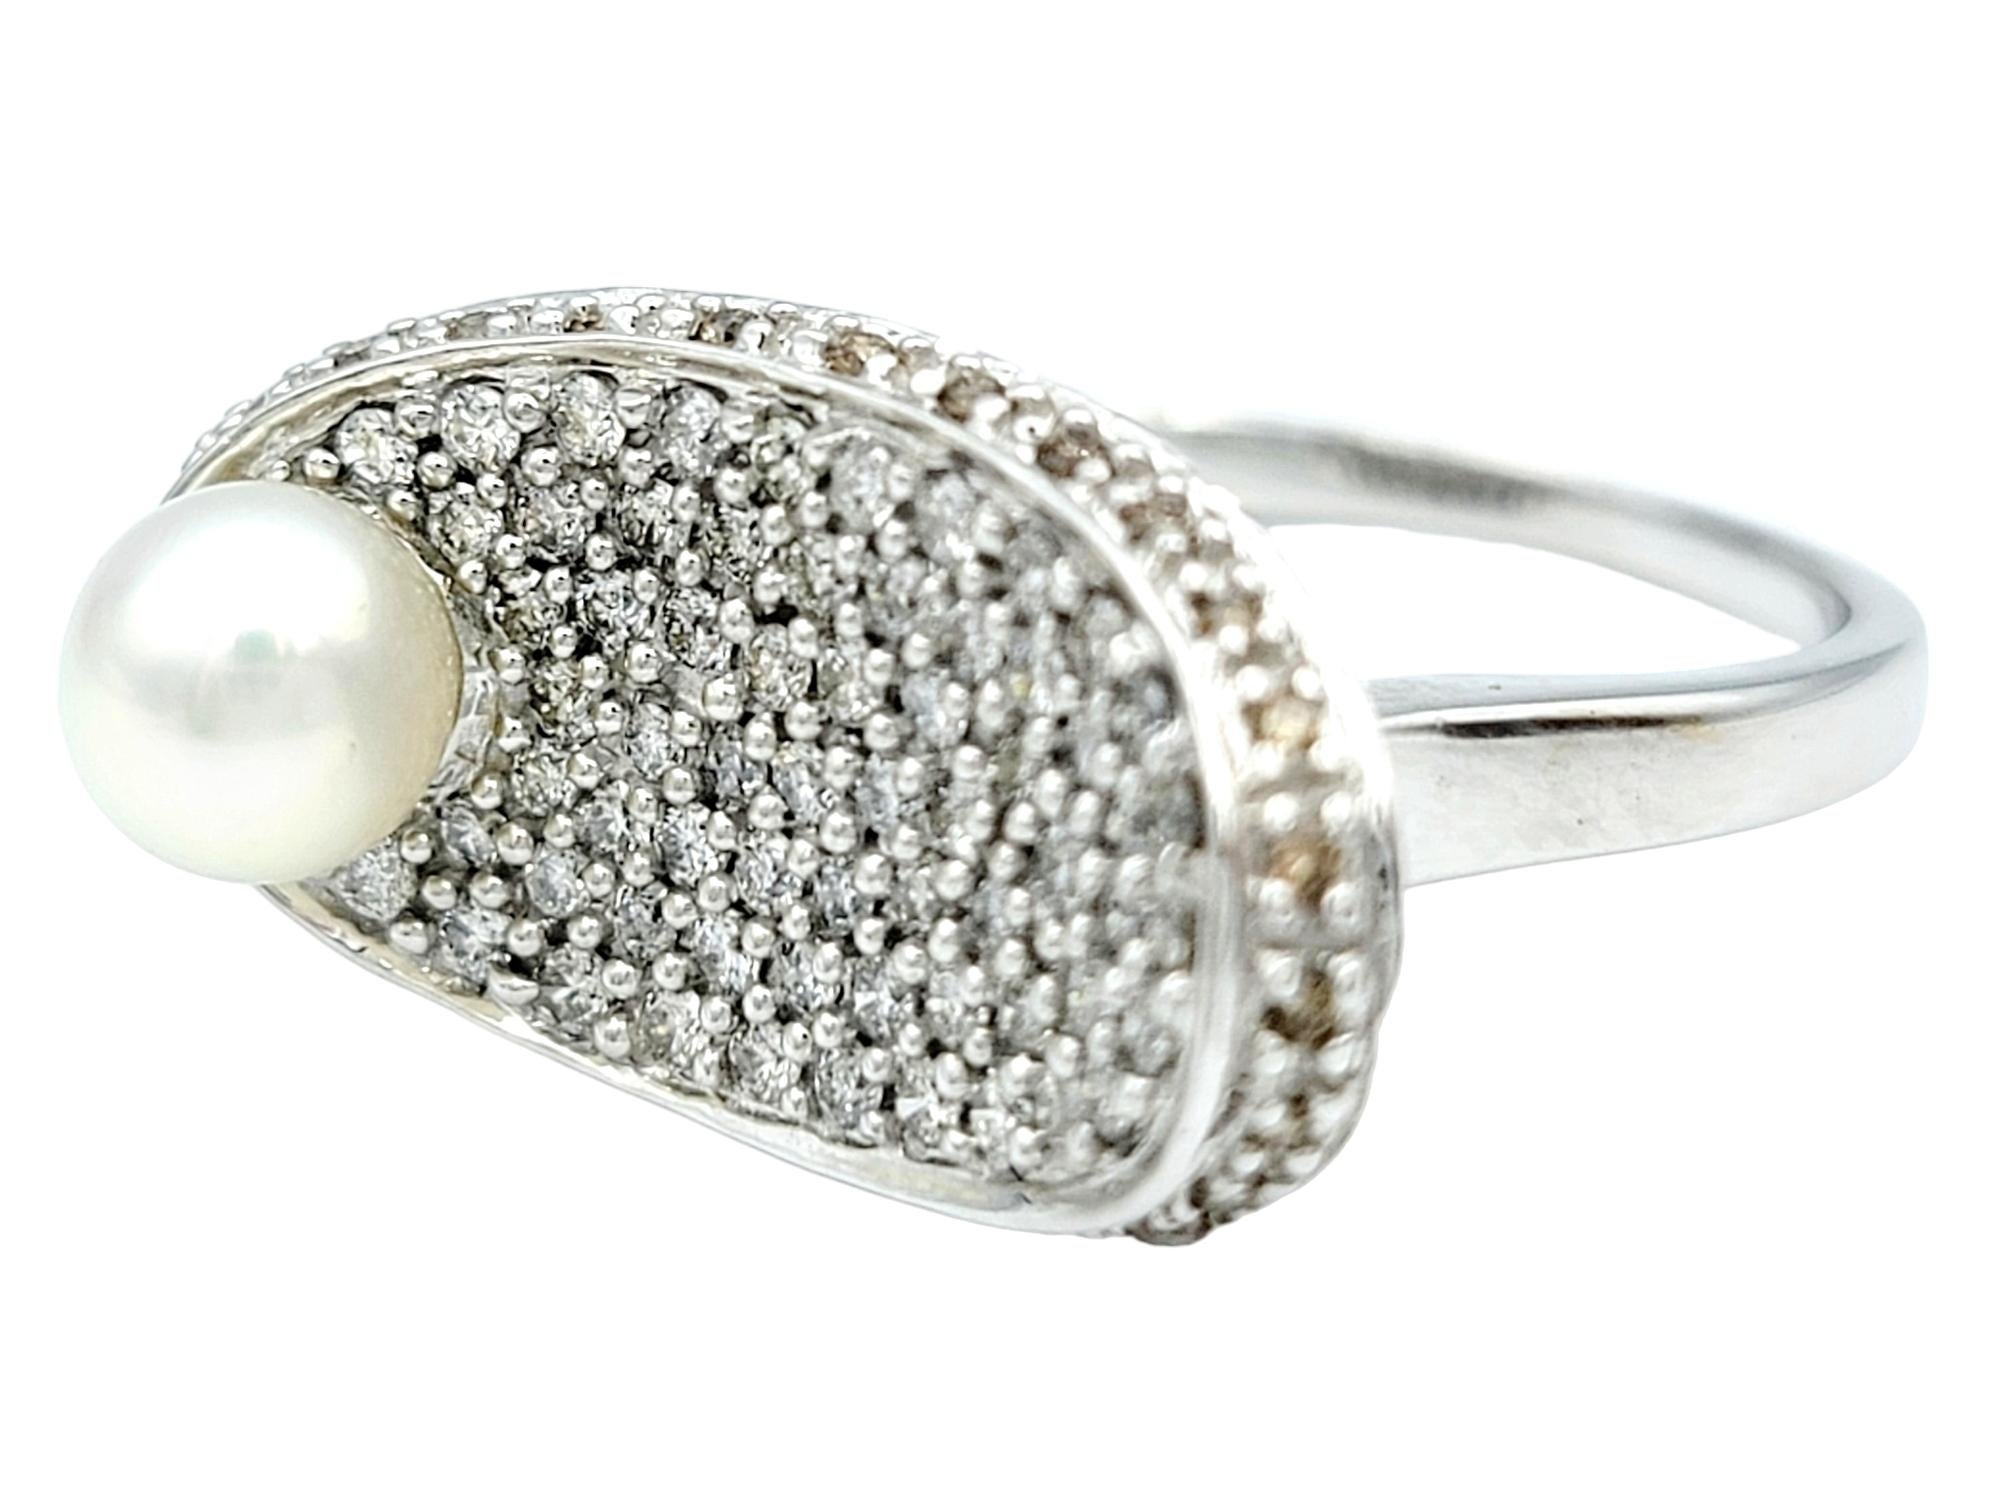 Pave Diamond and Akoya Pearl Oval Concave Cocktail Ring in 14 Karat White Gold In Good Condition For Sale In Scottsdale, AZ